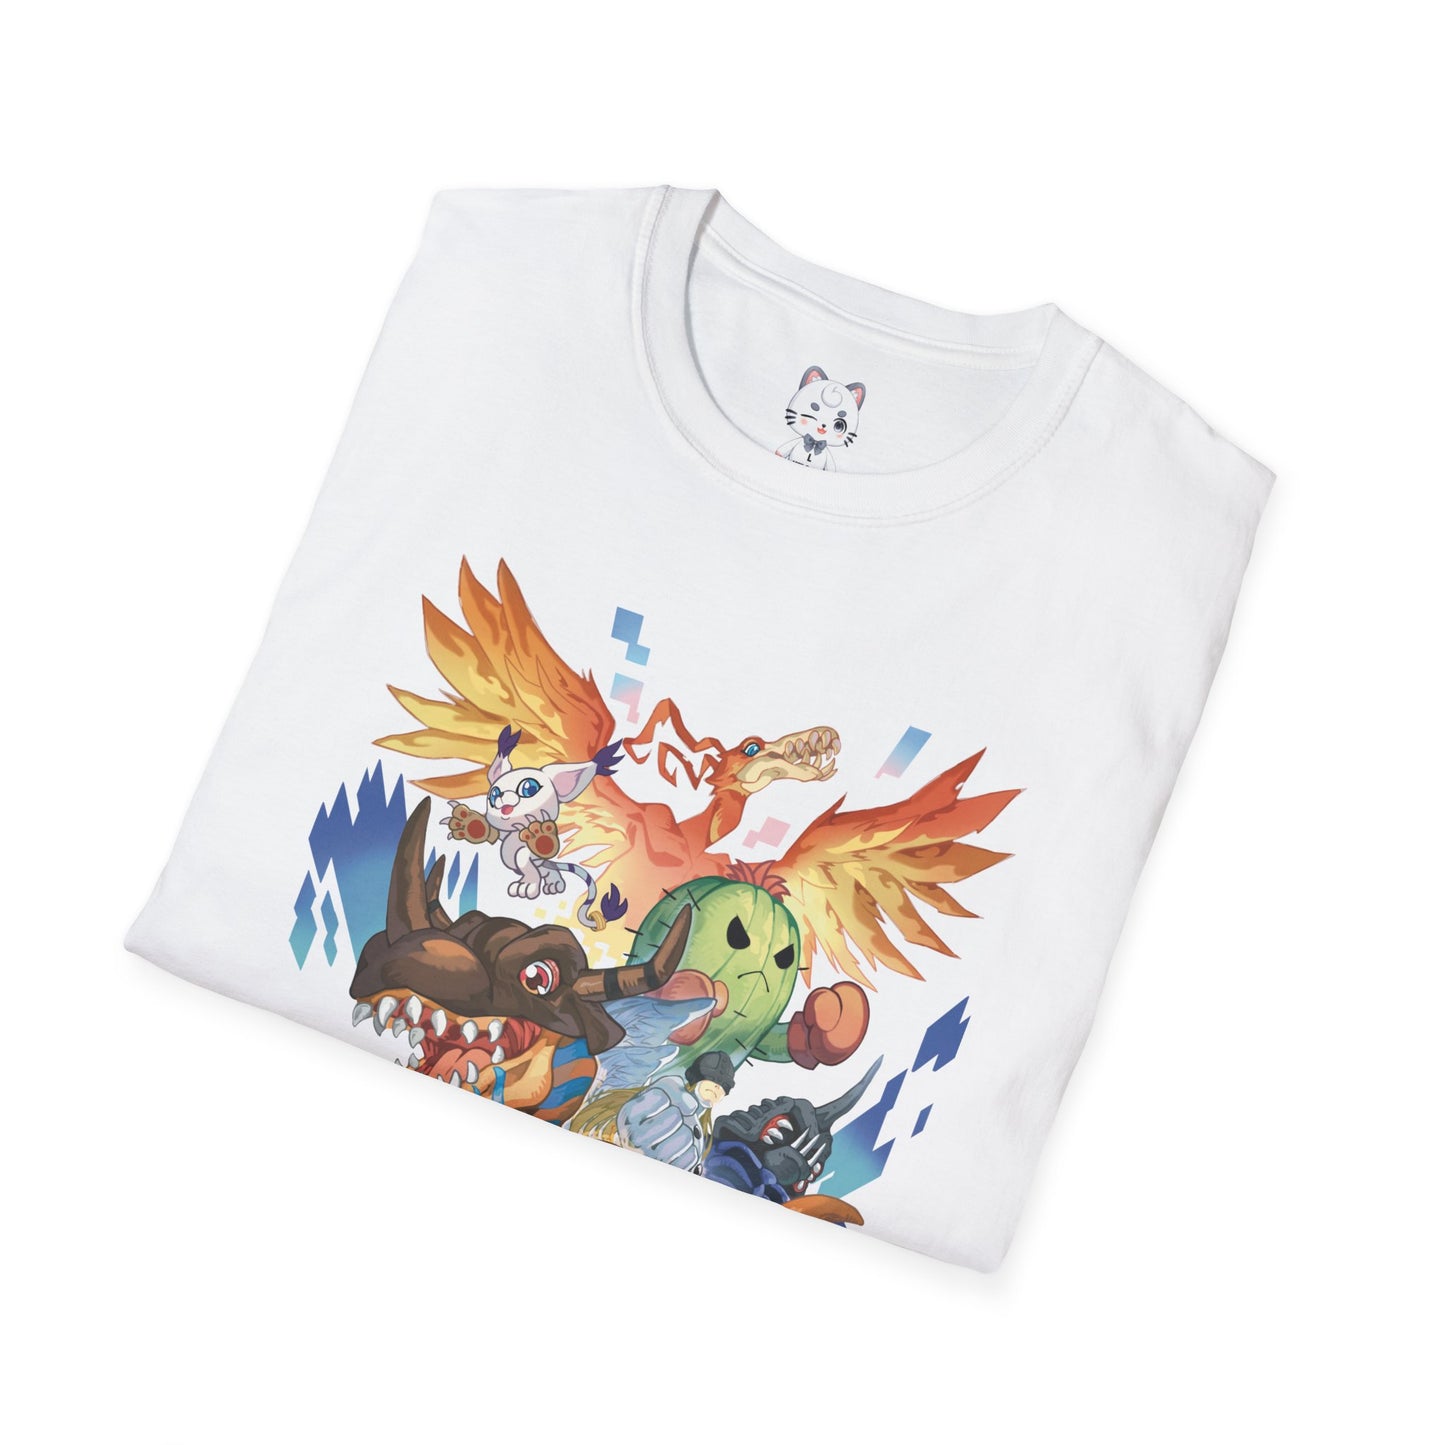 Digimon 01 T-Shirt Design by Currynoodleart